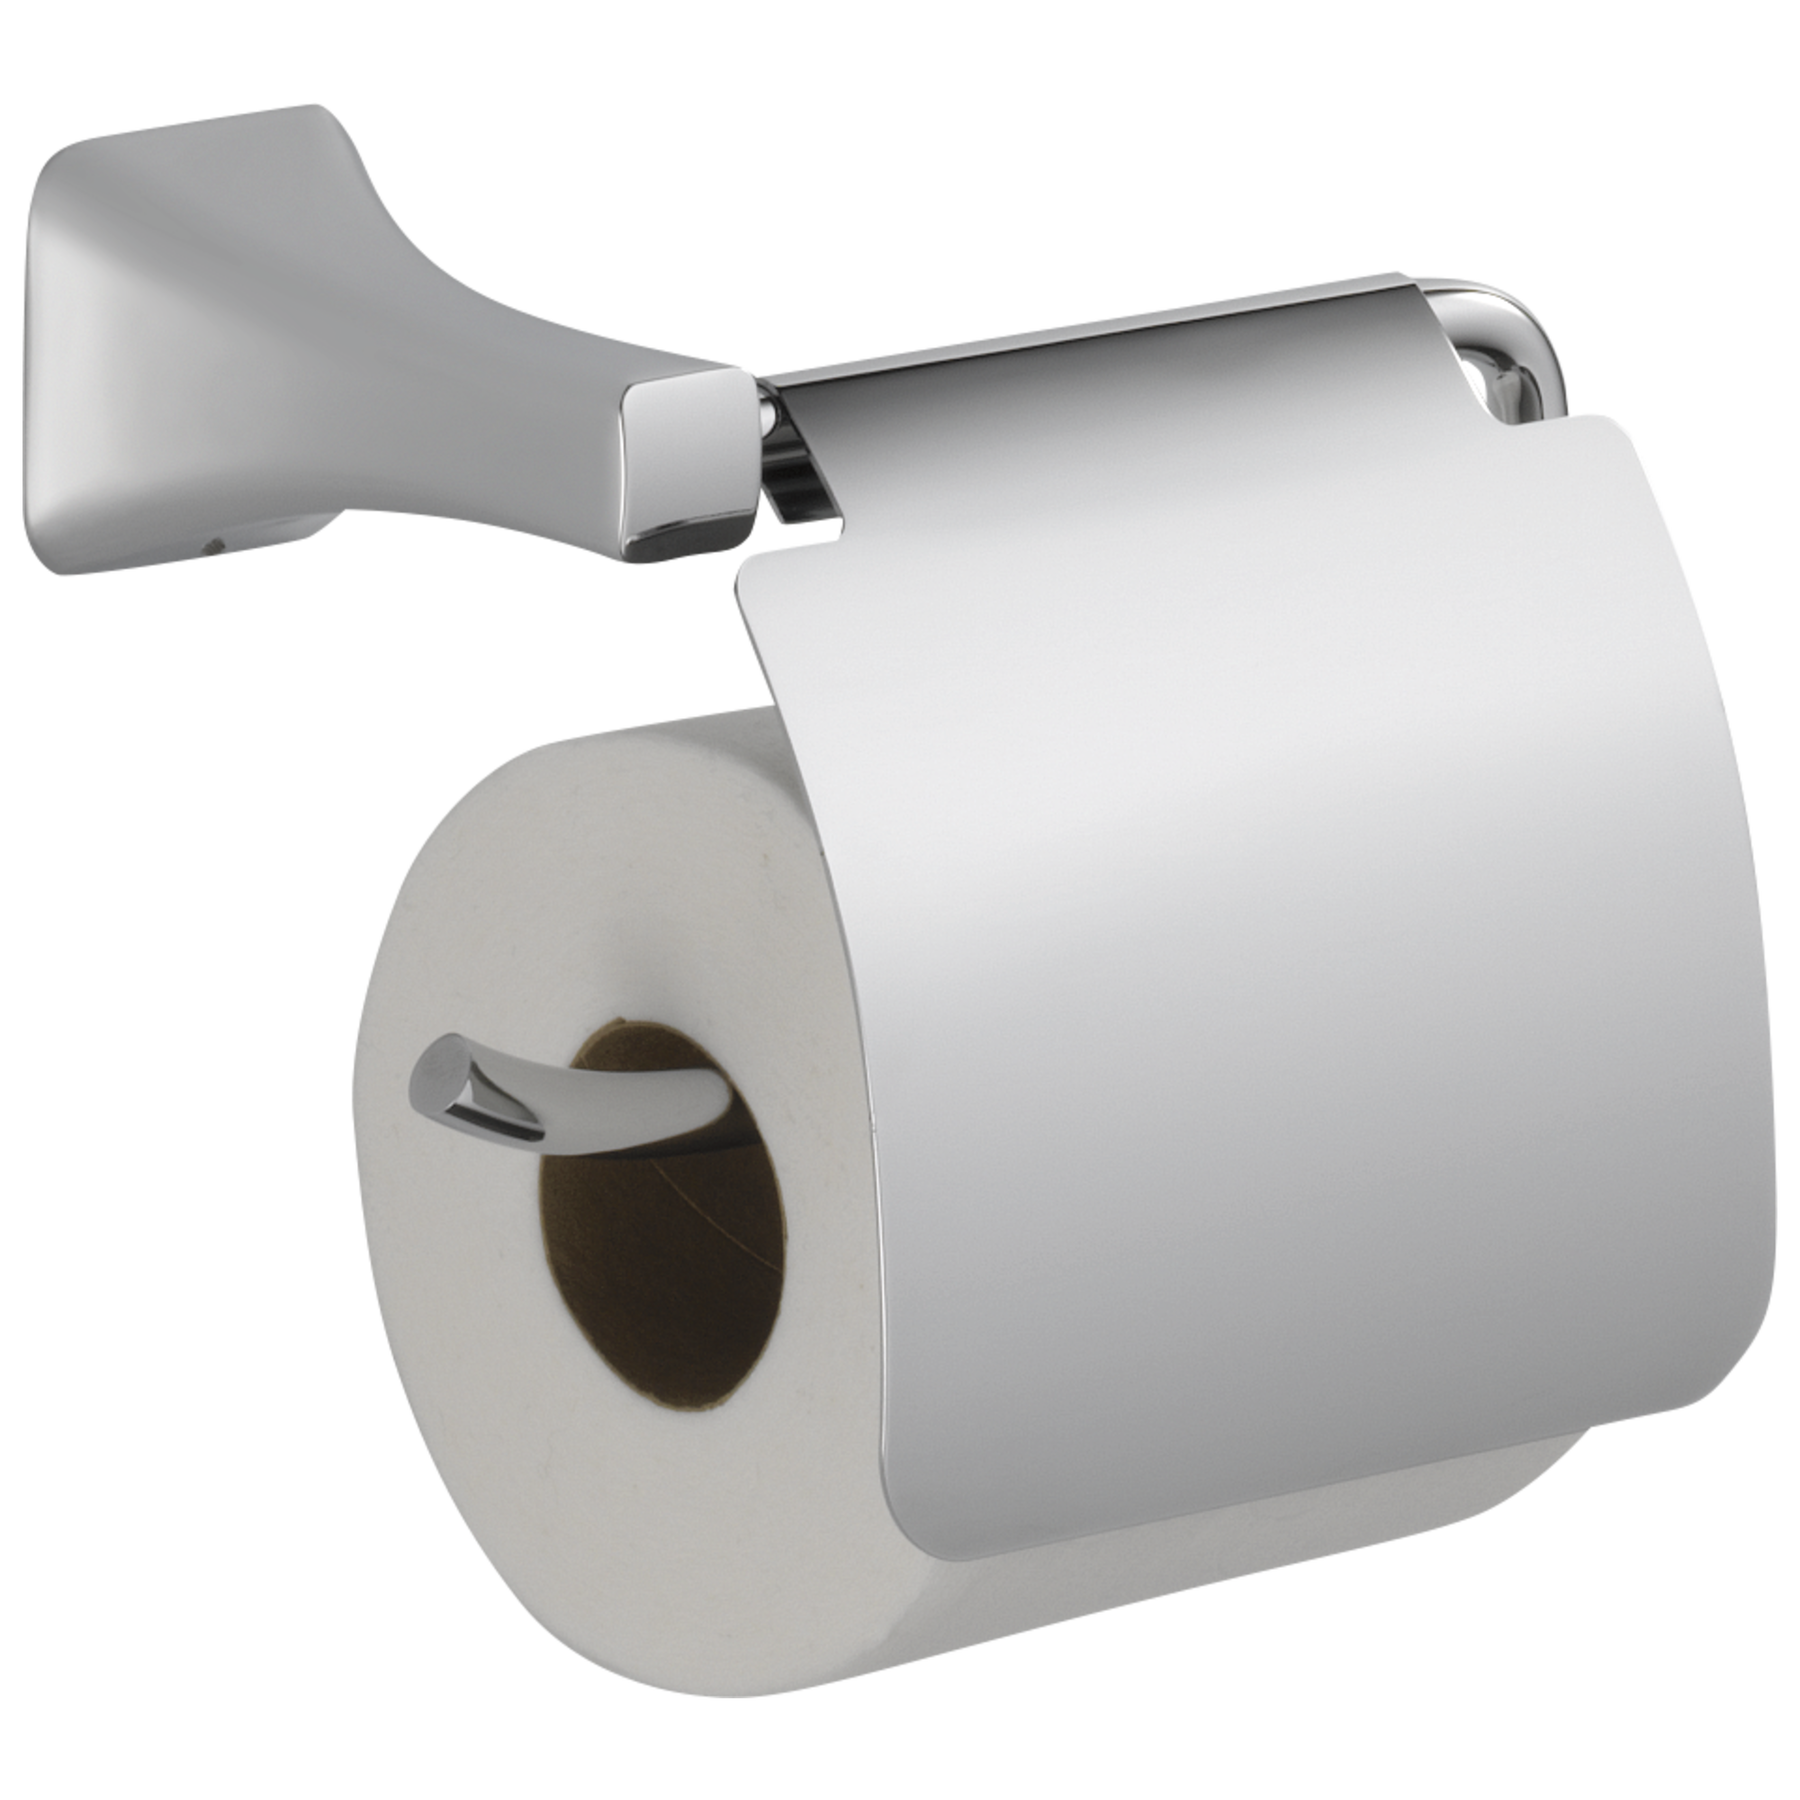 Mango Steam Toilet Paper Holder with Storage - Taupe